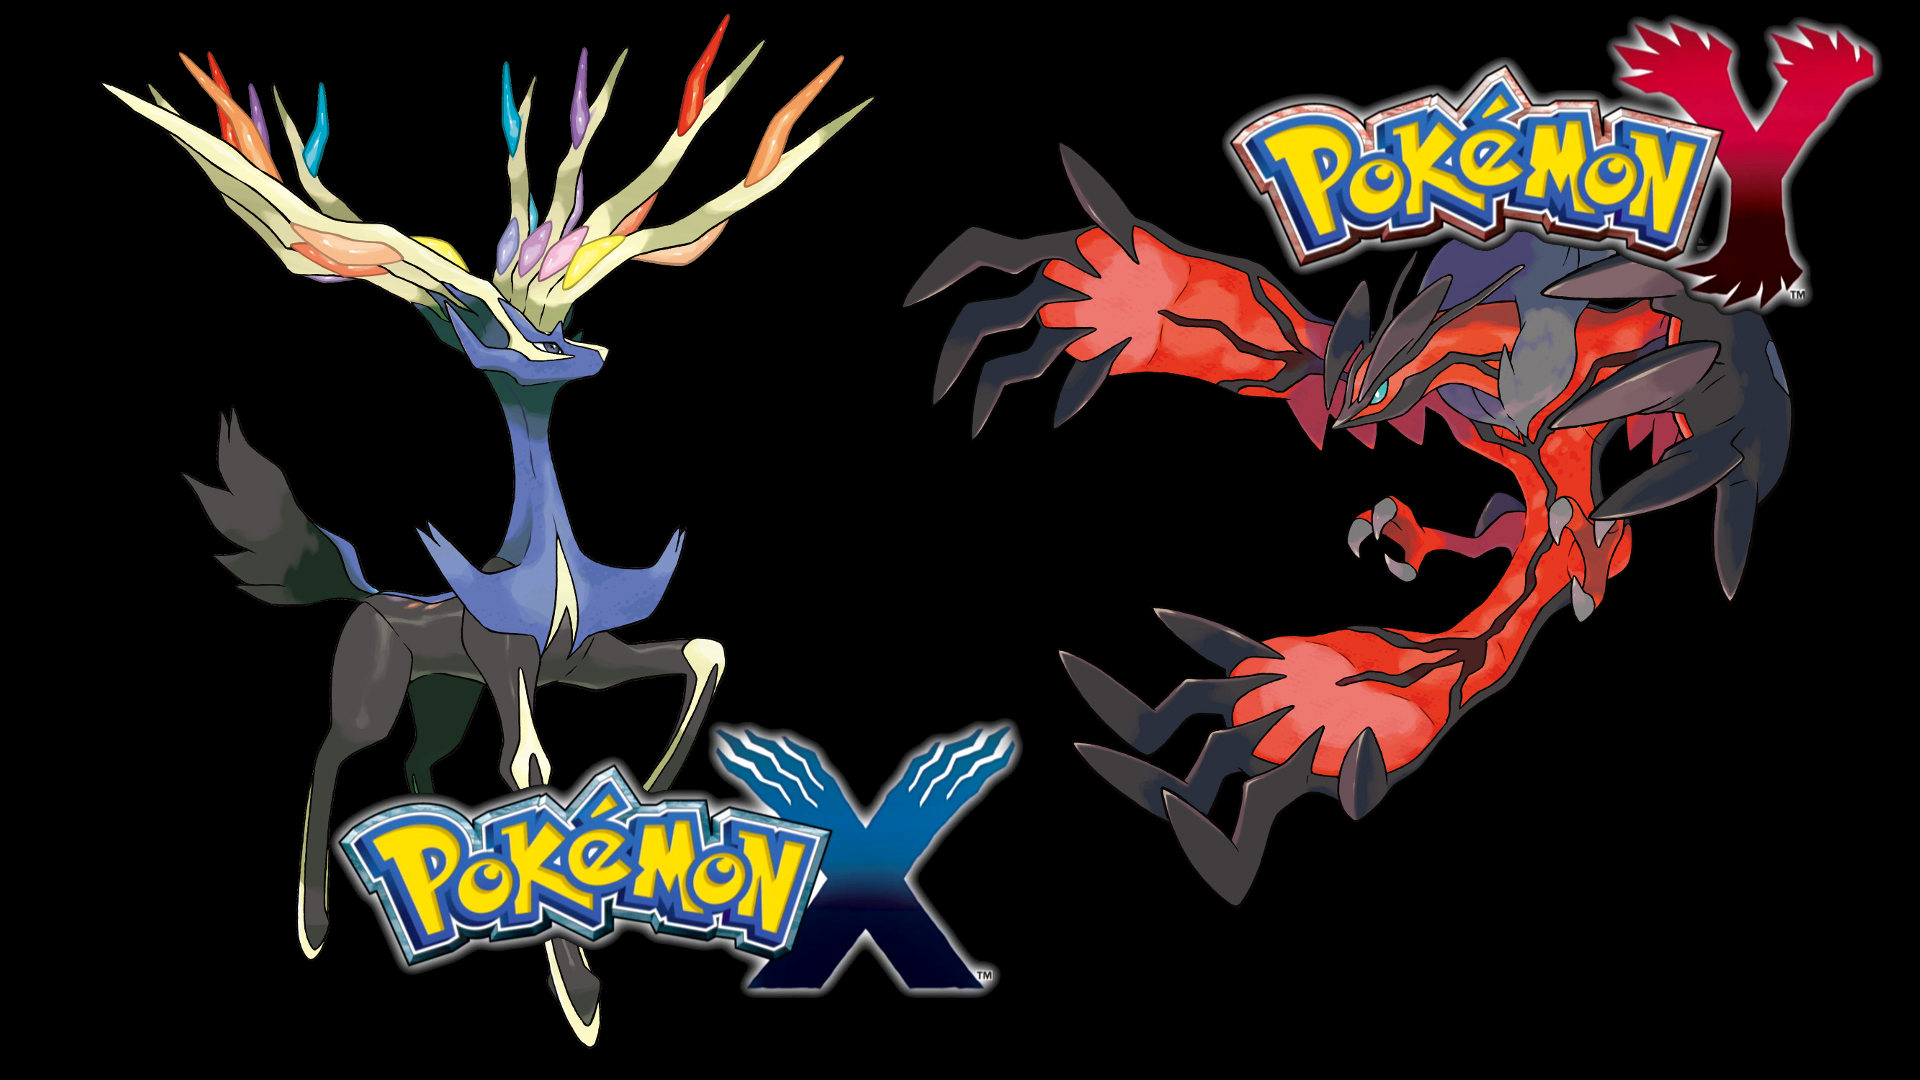 10 Million Pokemon Have Been Traded So Far In Pokemon X And Y.